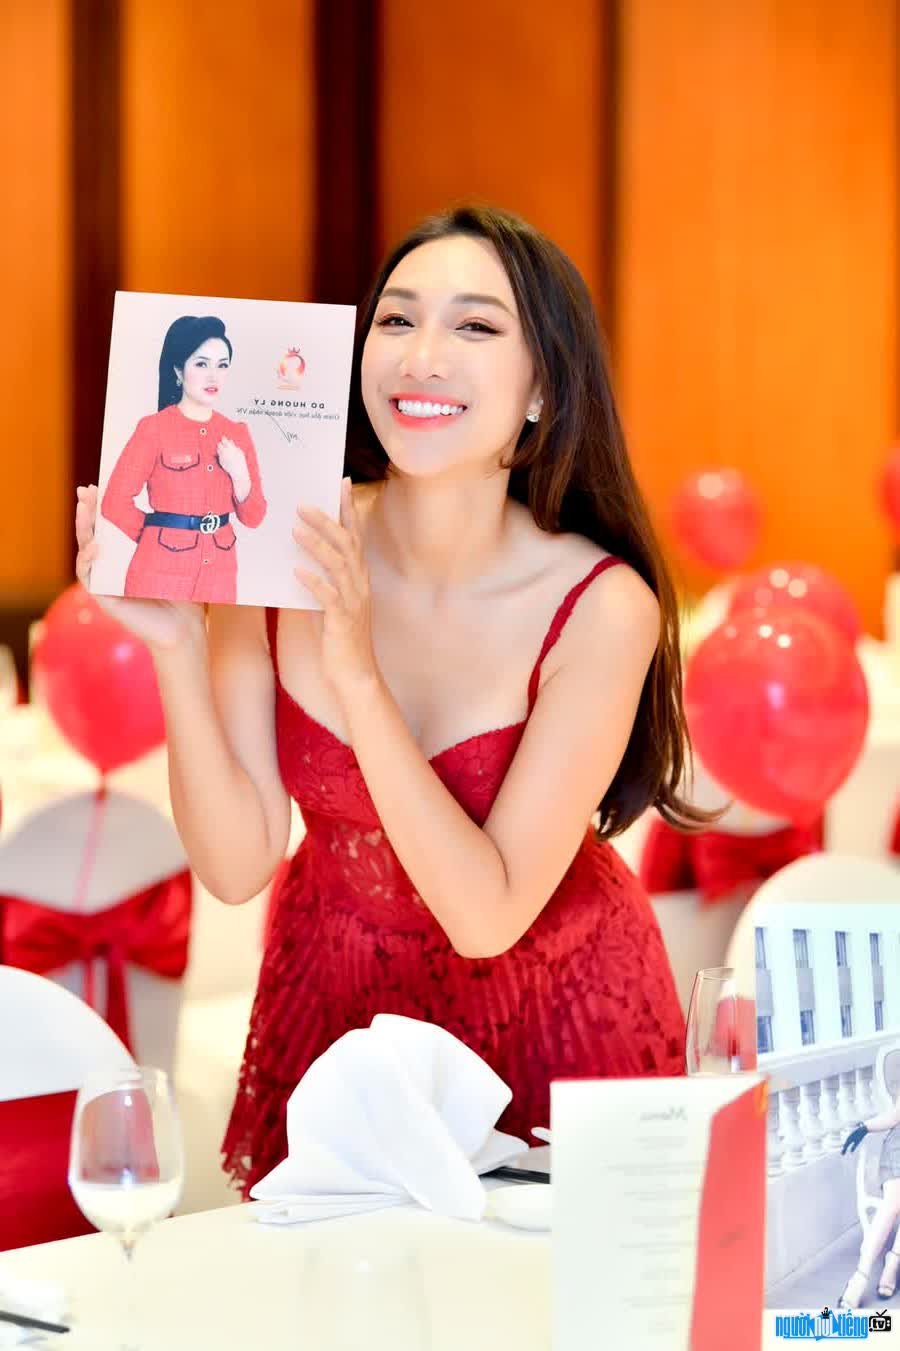 Business picture of Luong Thi Mai Anh on magazine cover